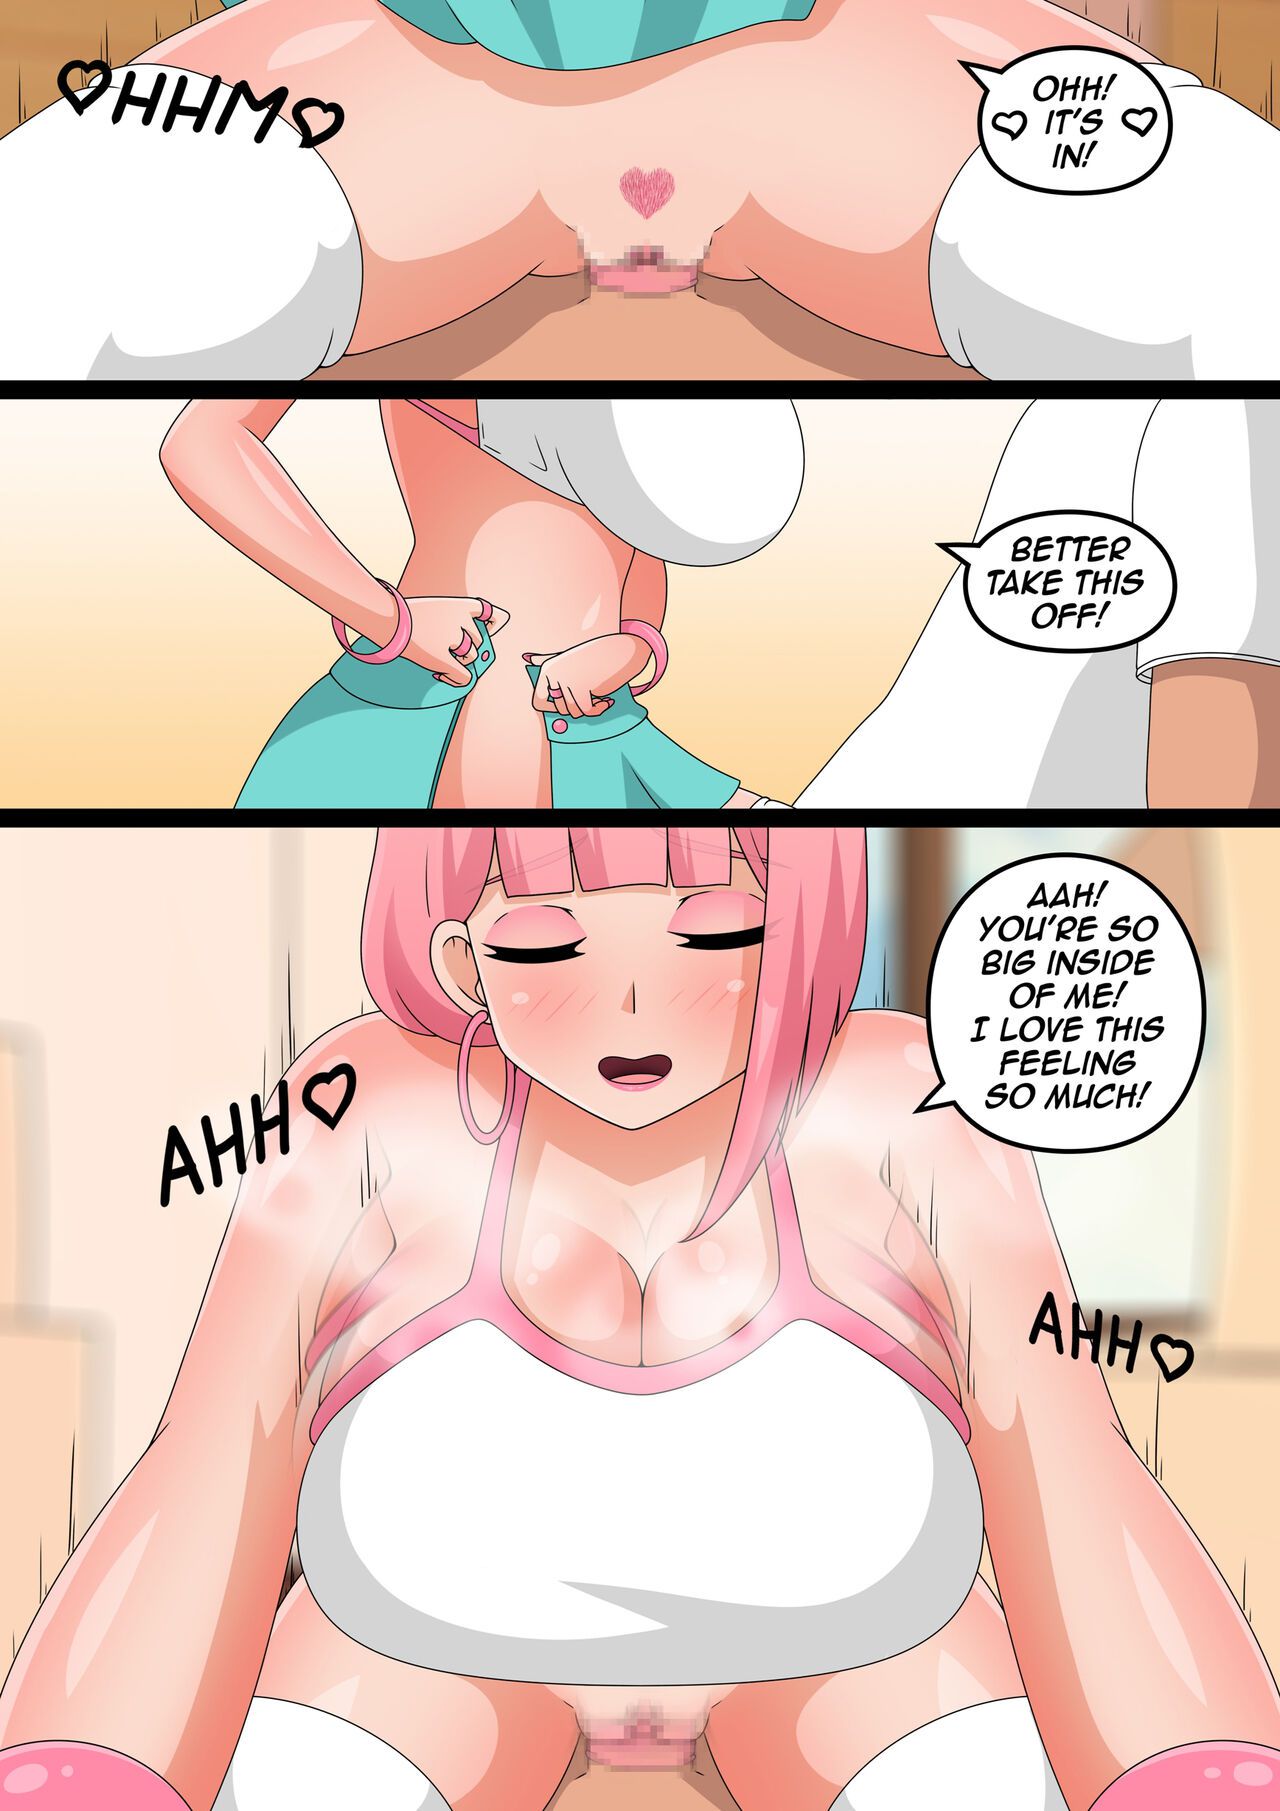 Zoey The Love Story [page 24 added] 22